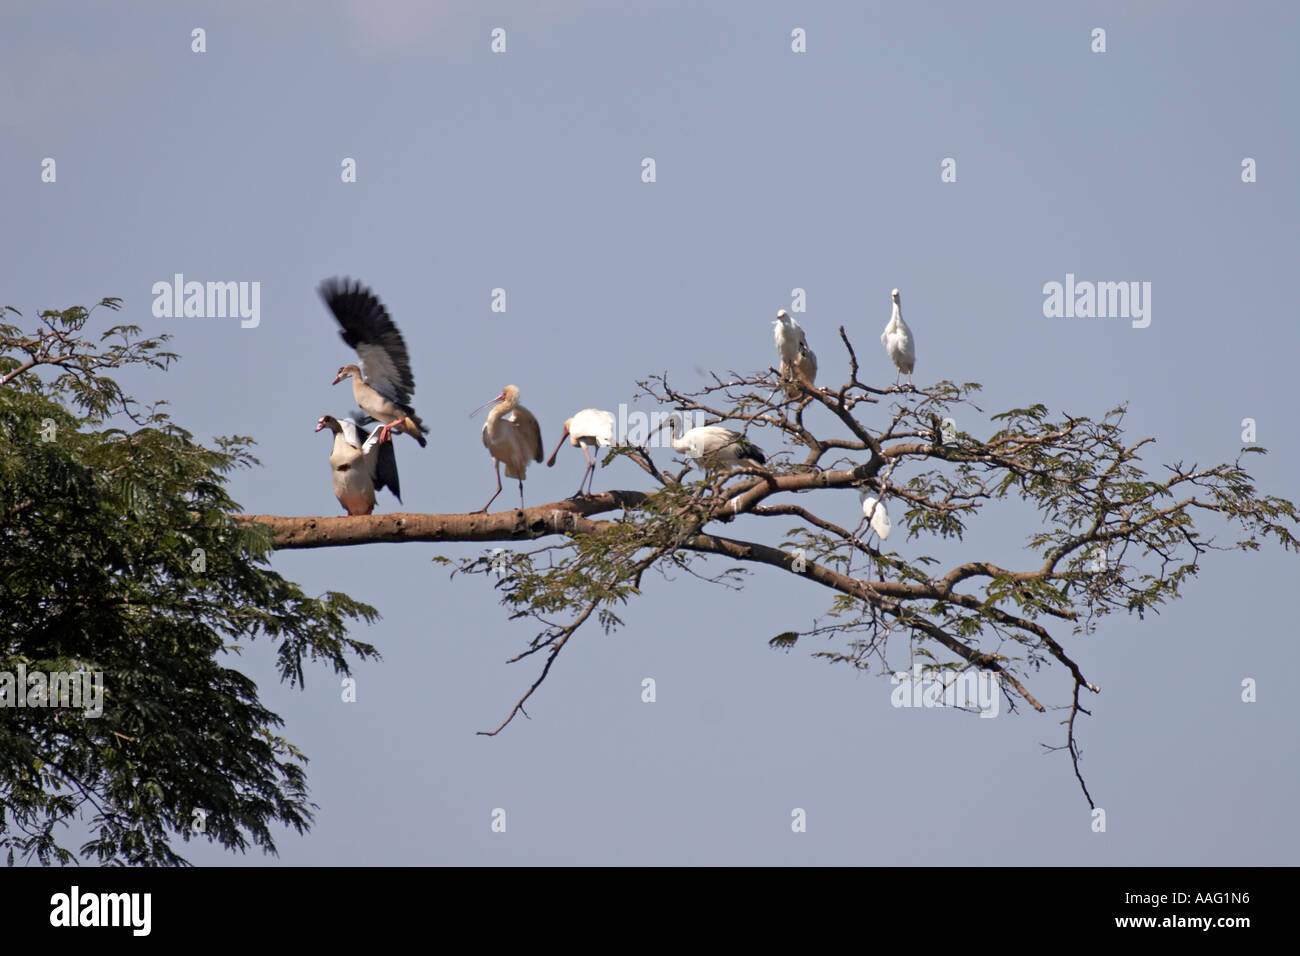 Egyptian goose scared away by Spoonbill with Sacred ibis and Cattle egrets in a tree near Kuch Ethiopia Africa Stock Photo